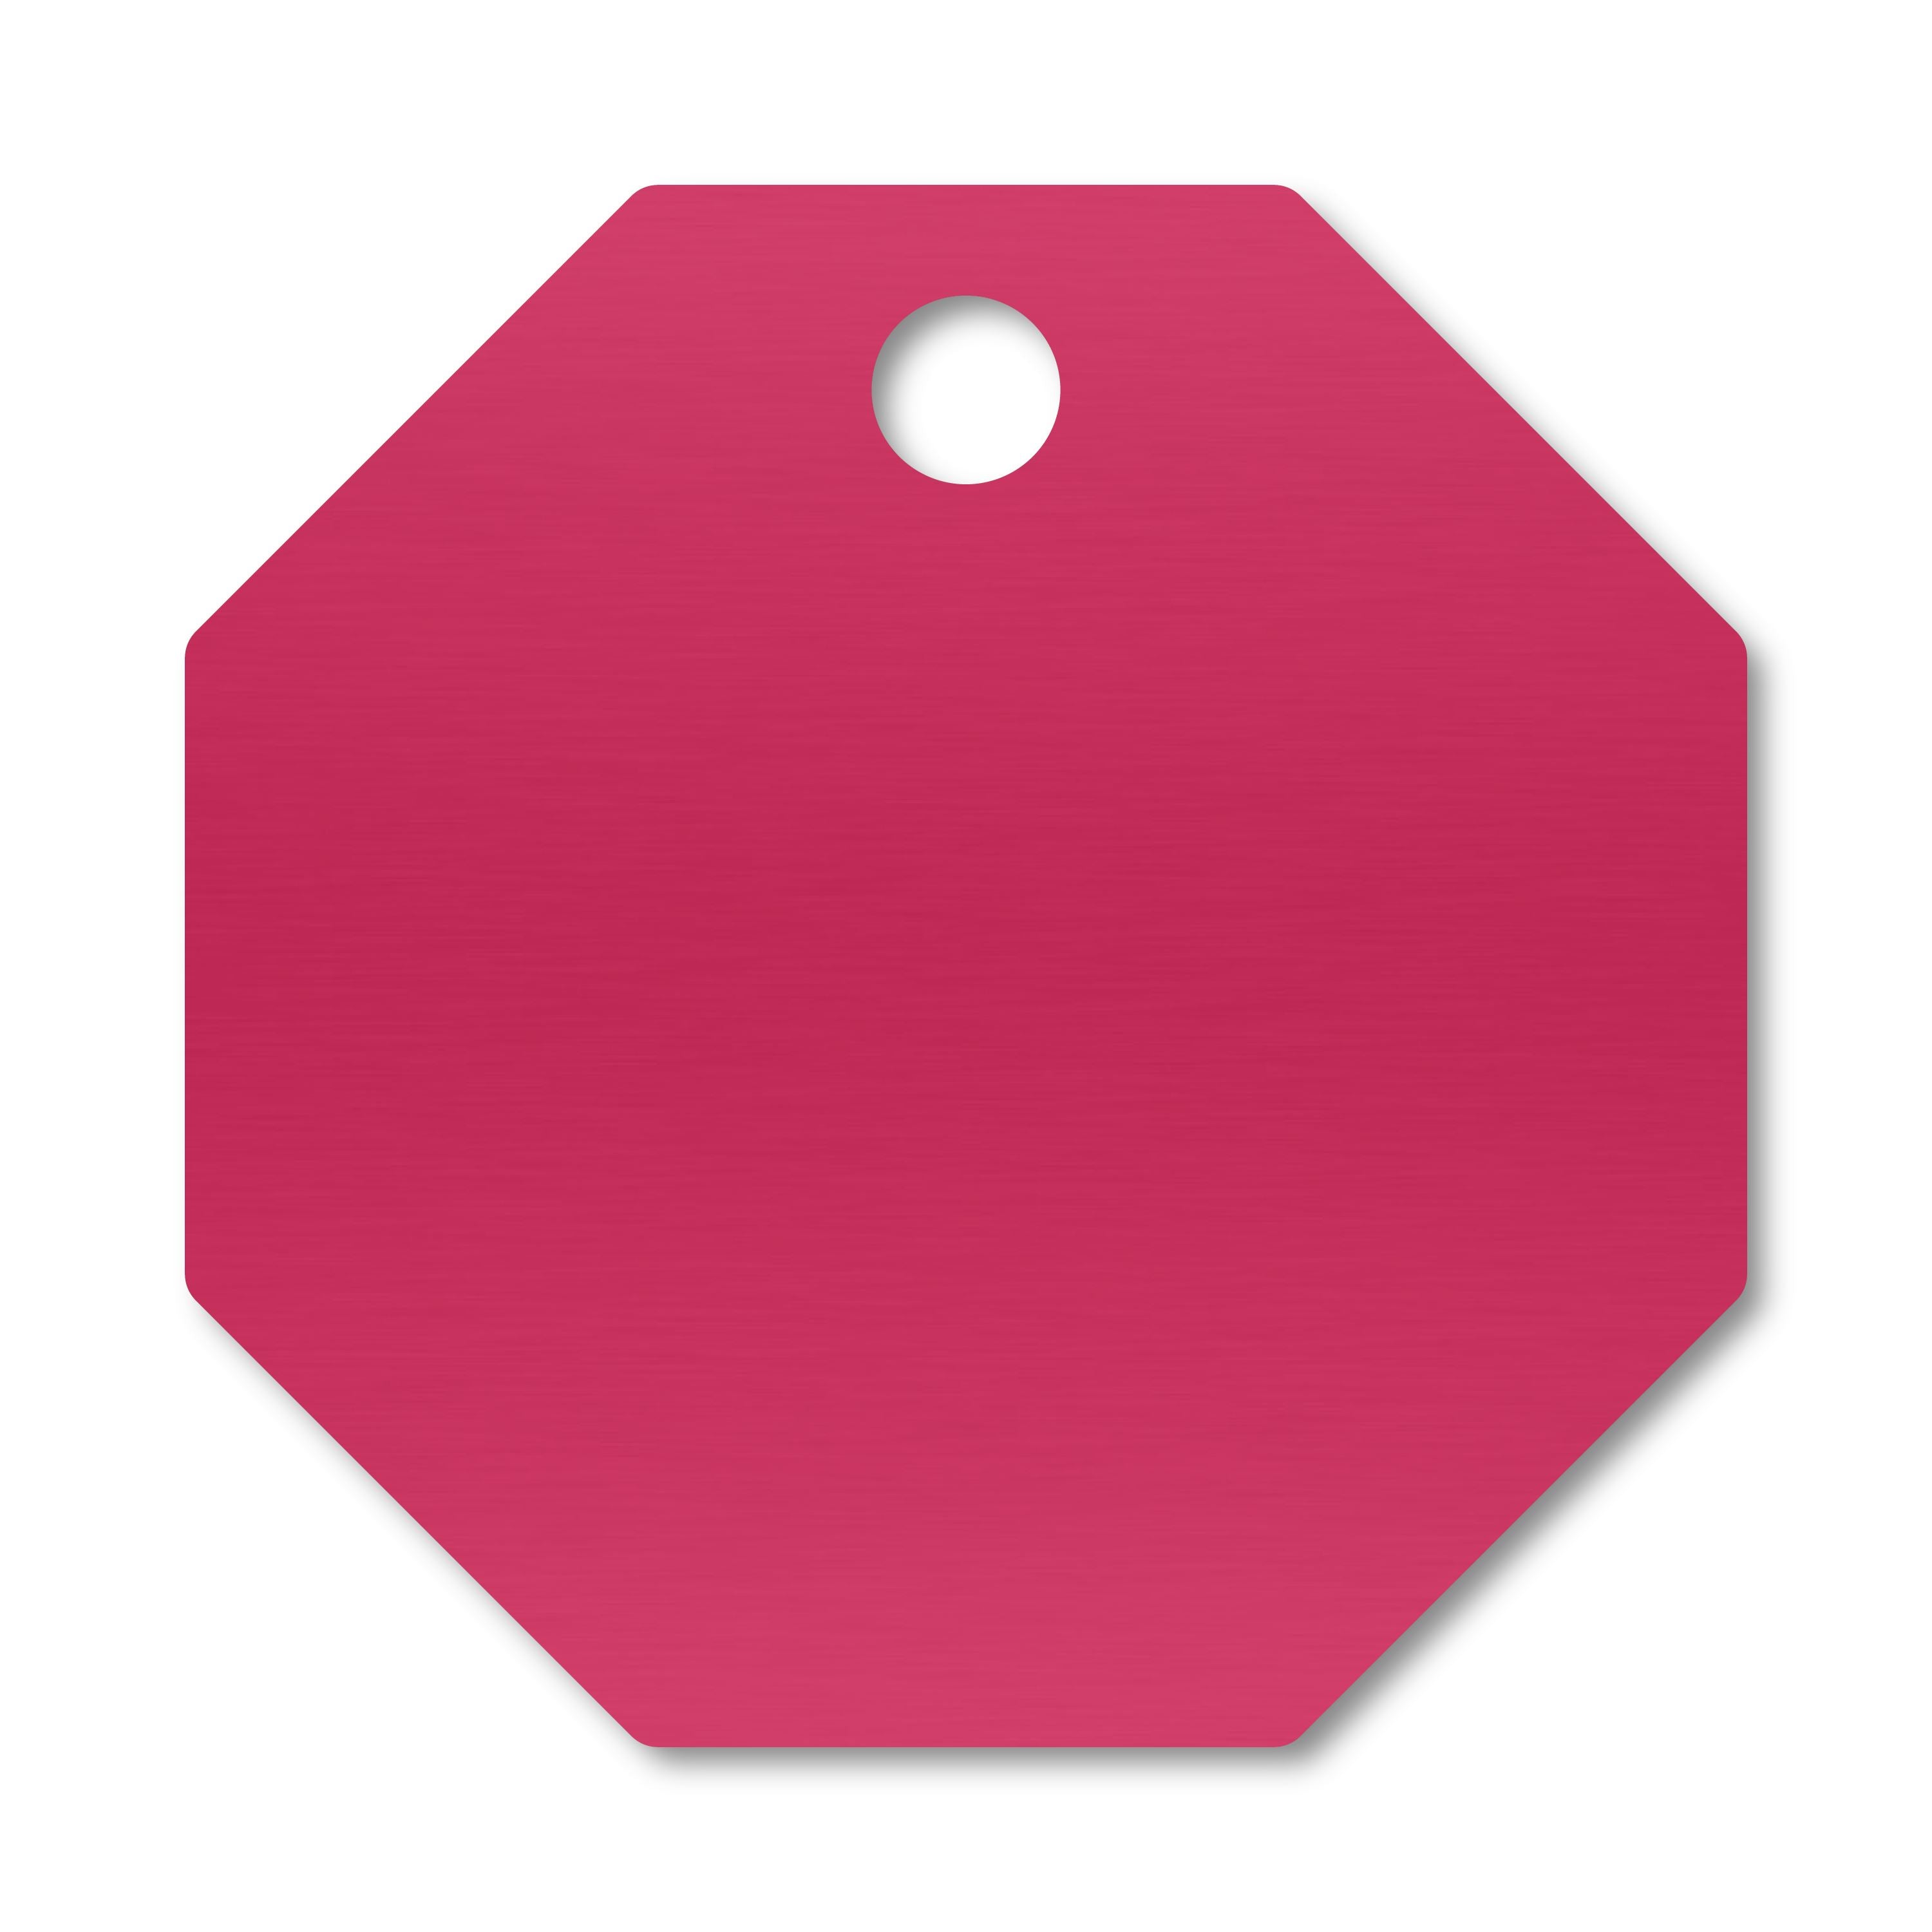 Anodized Aluminum Octagon Tags, 1" with 3/32" Hole, Laser Engraved Metal Tags Craftworks NW Pink 